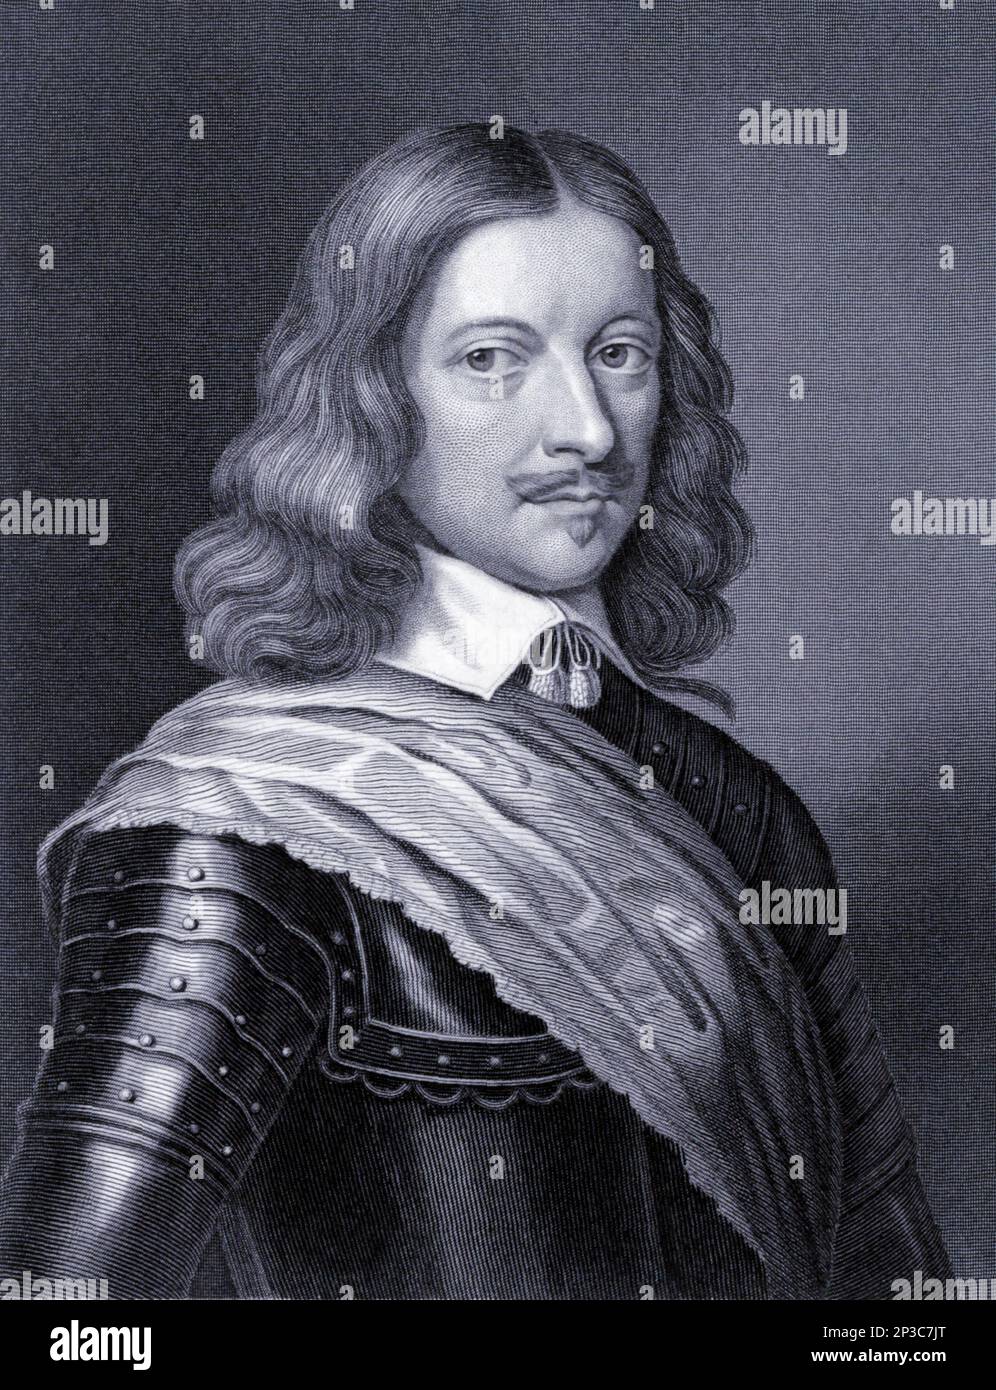 James Graham, 1st Marquess of Montrose (1612 – 21 May 1650) was a Scottish nobleman, poet, soldier and later viceroy and captain general of Scotland. Montrose initially joined the Covenanters in the Wars of the Three Kingdoms, but subsequently supported King Charles I as the English Civil War developed. From 1644 to 1646, and again in 1650, he fought in the civil war in Scotland on behalf of the King. He is referred to as the Great Montrose. from the book ' A history of the Scottish Highlands, Highland clans and Highland regiments ' Volume 1 by Maclauchlan, Thomas, 1816-1886; Wilson, John, 178 Stock Photo